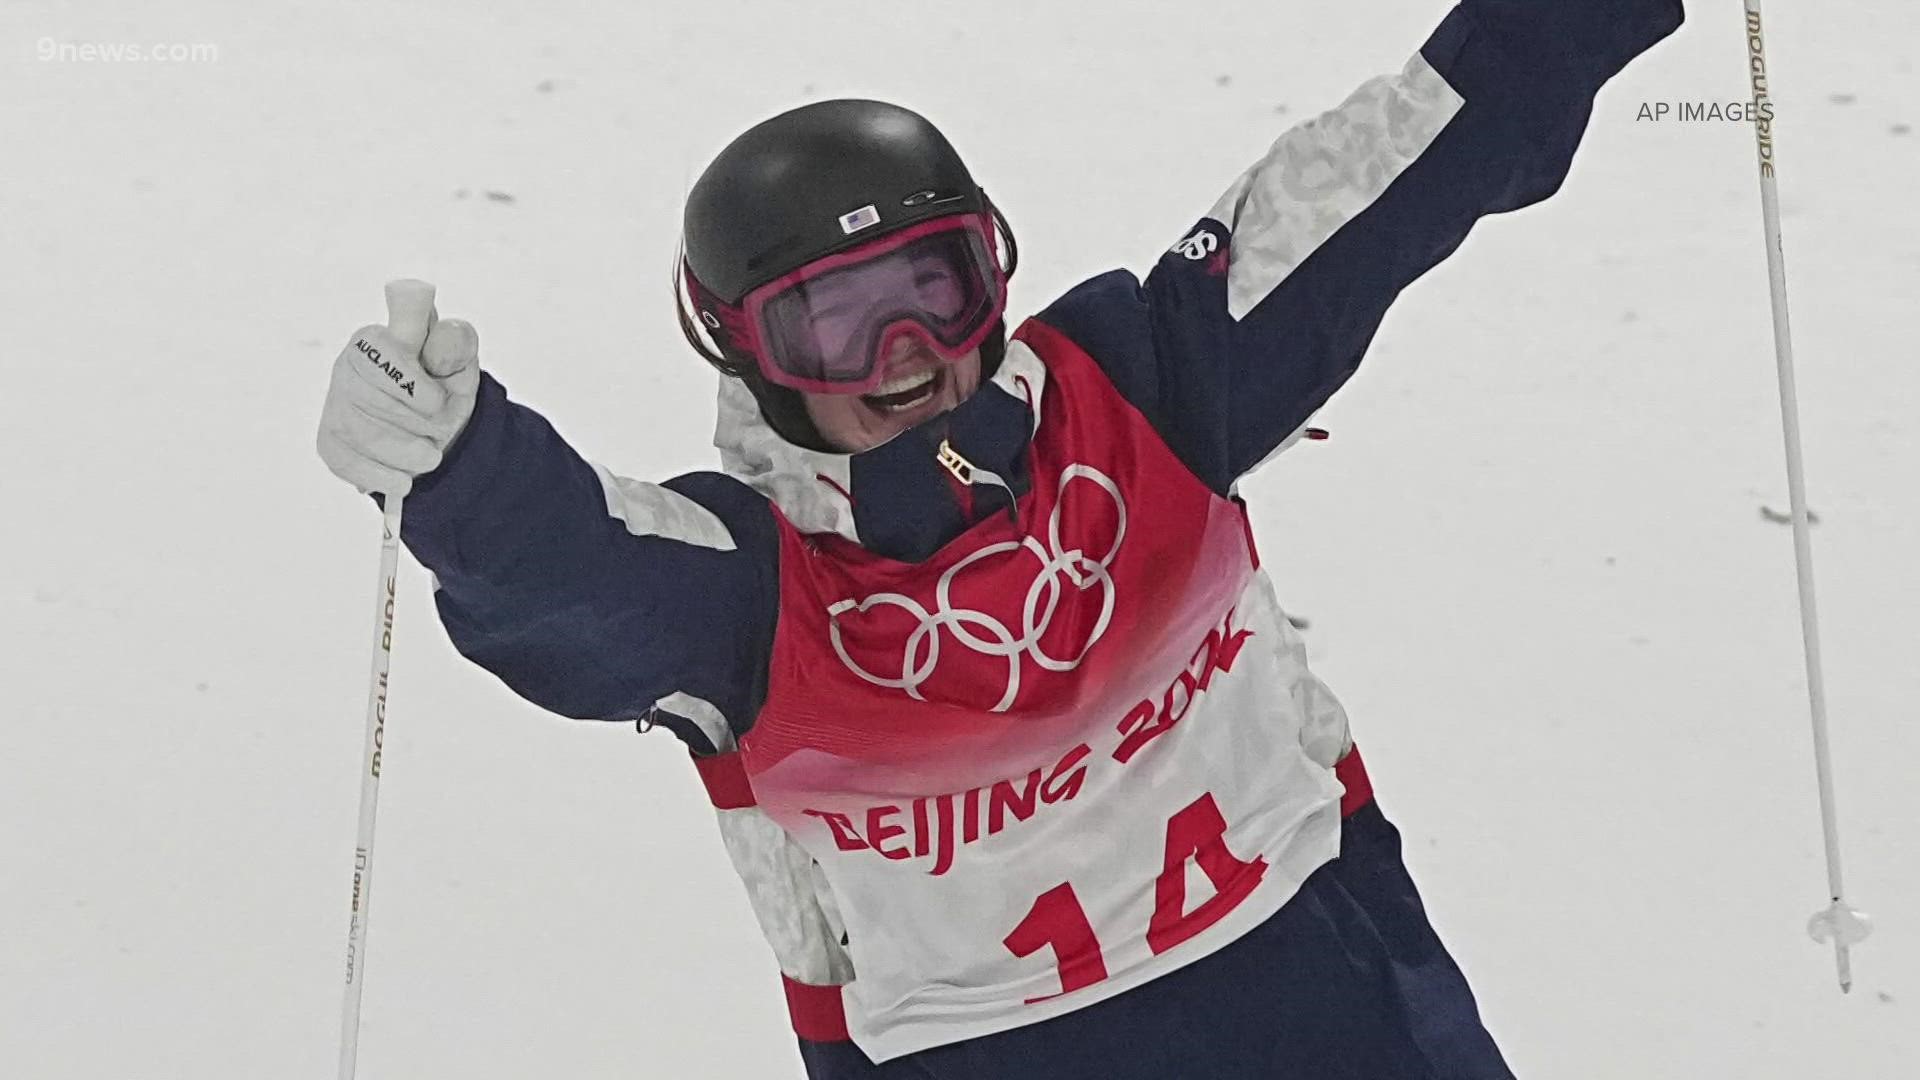 Colorado's Jaelin Kauf earned Team USA's second medal of the Beijing Olympics when she took home silver in the women's moguls.